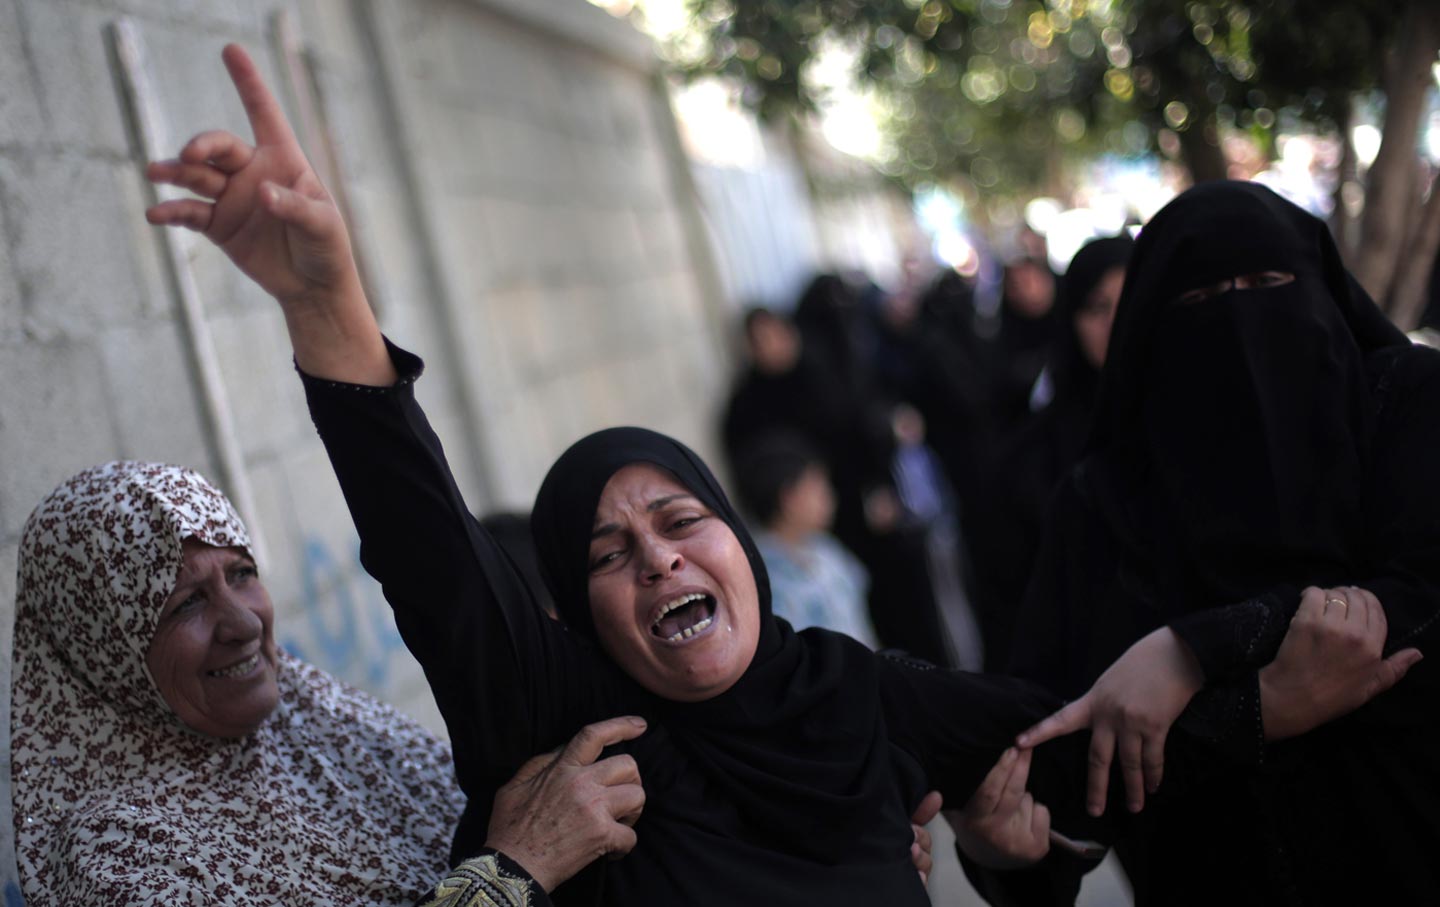 Palestinian women mourn at the funeral of Ahmed Al-Serhi, 27, who was killed during clashes with Israeli troops.